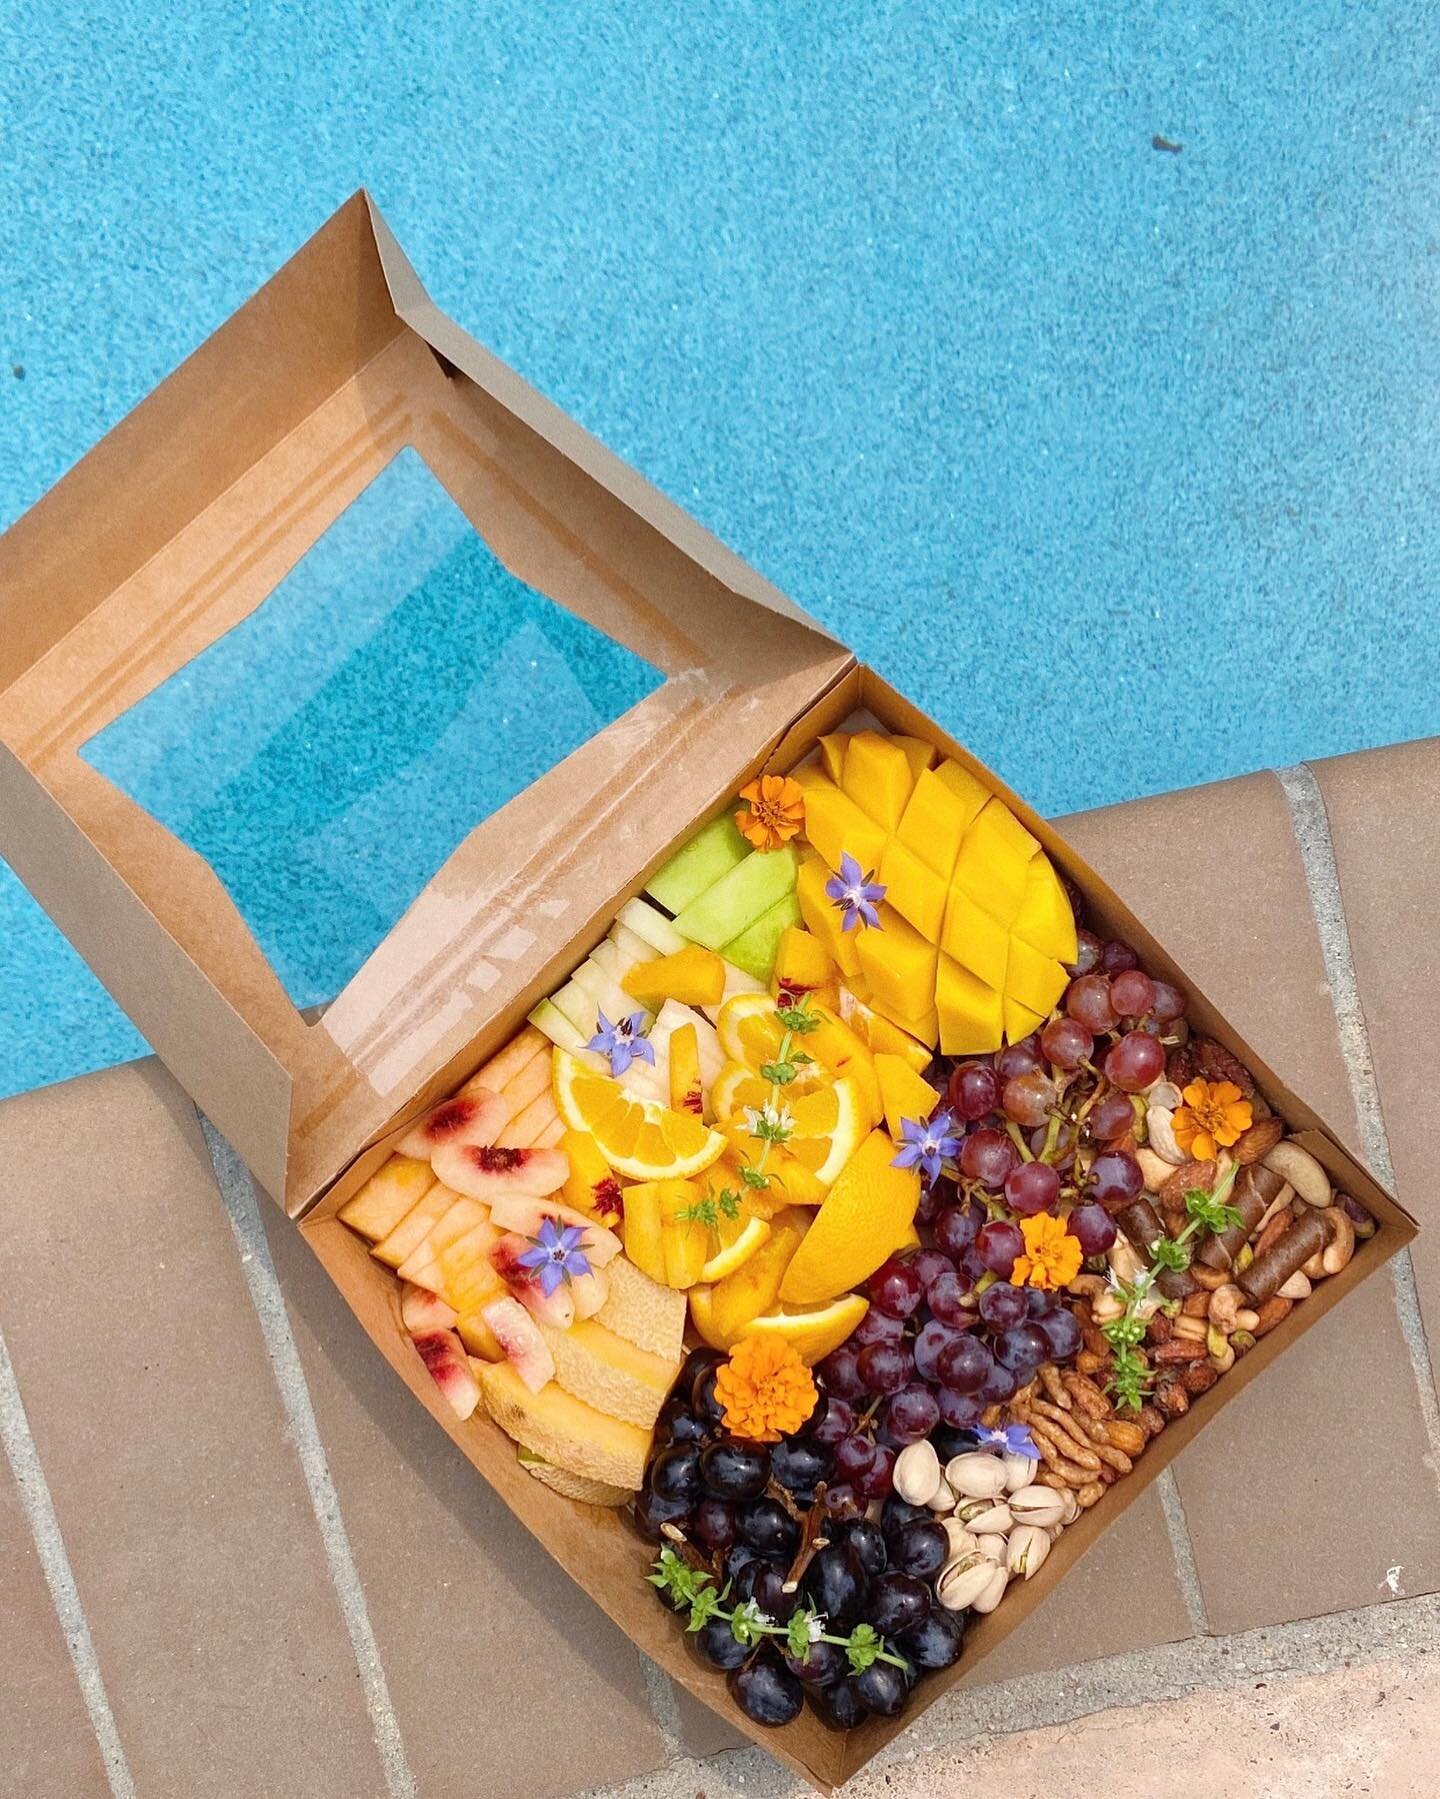 It may be Autumn, but my heart is still in Summer ☀️✨ We&rsquo;ll miss our favorite summer fruits 🥺

(Pictured: Soirée Picnic Box)
&bull;
&bull;
&bull;
&bull;
#itsbriethyme #cheeseboard #charcuterieboard #charcuterieboards #cheeselover #bayareashop